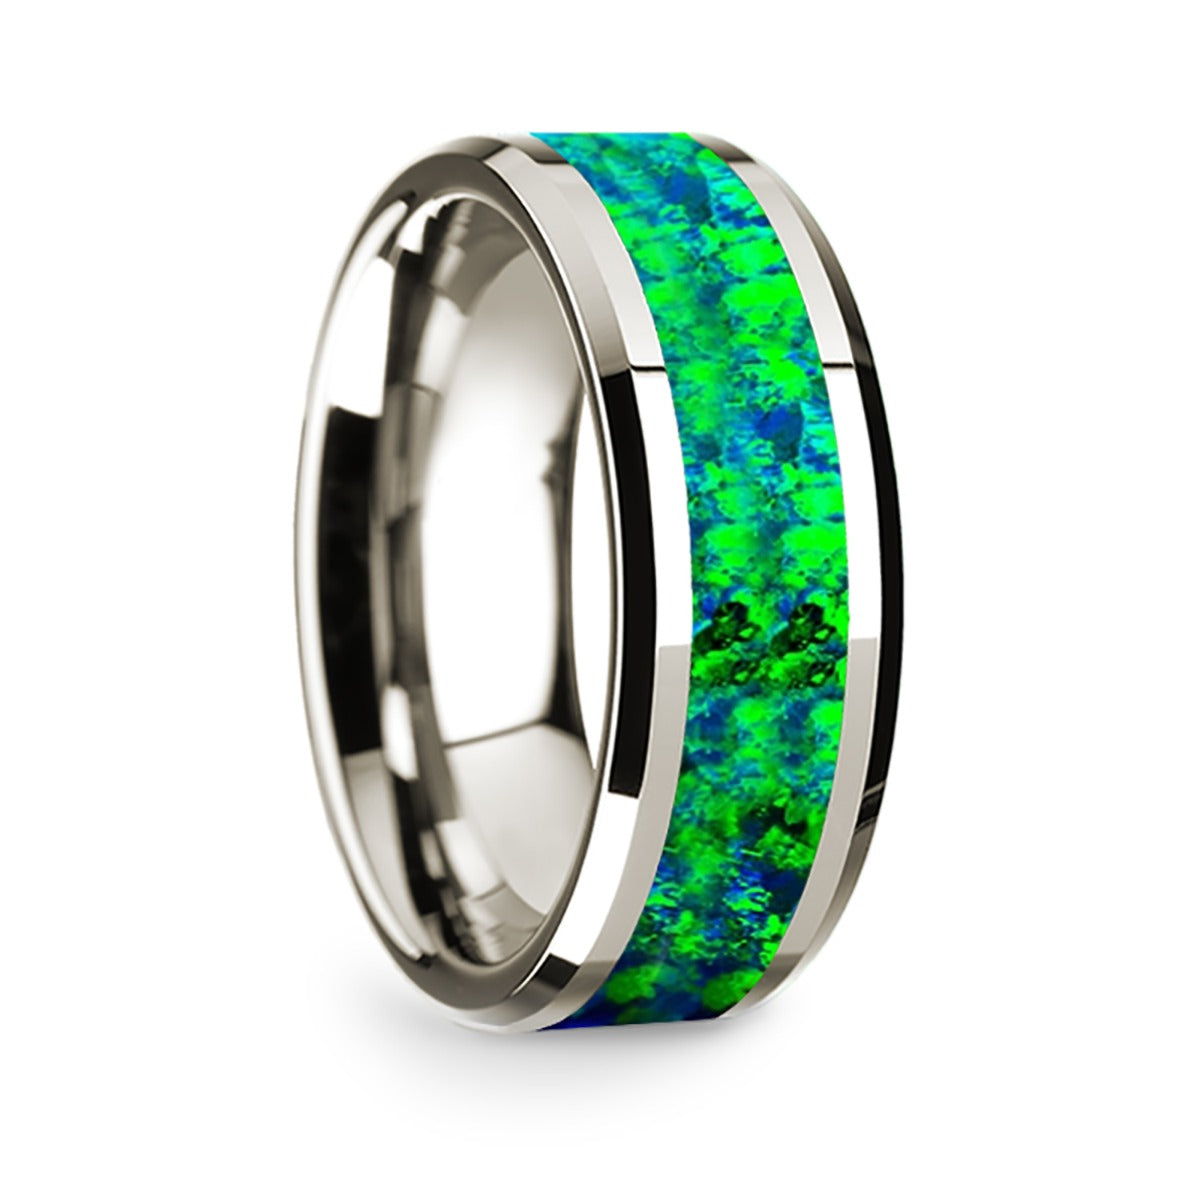 14k White Gold Men's Wedding Band with Blue and Green Opal Inlay